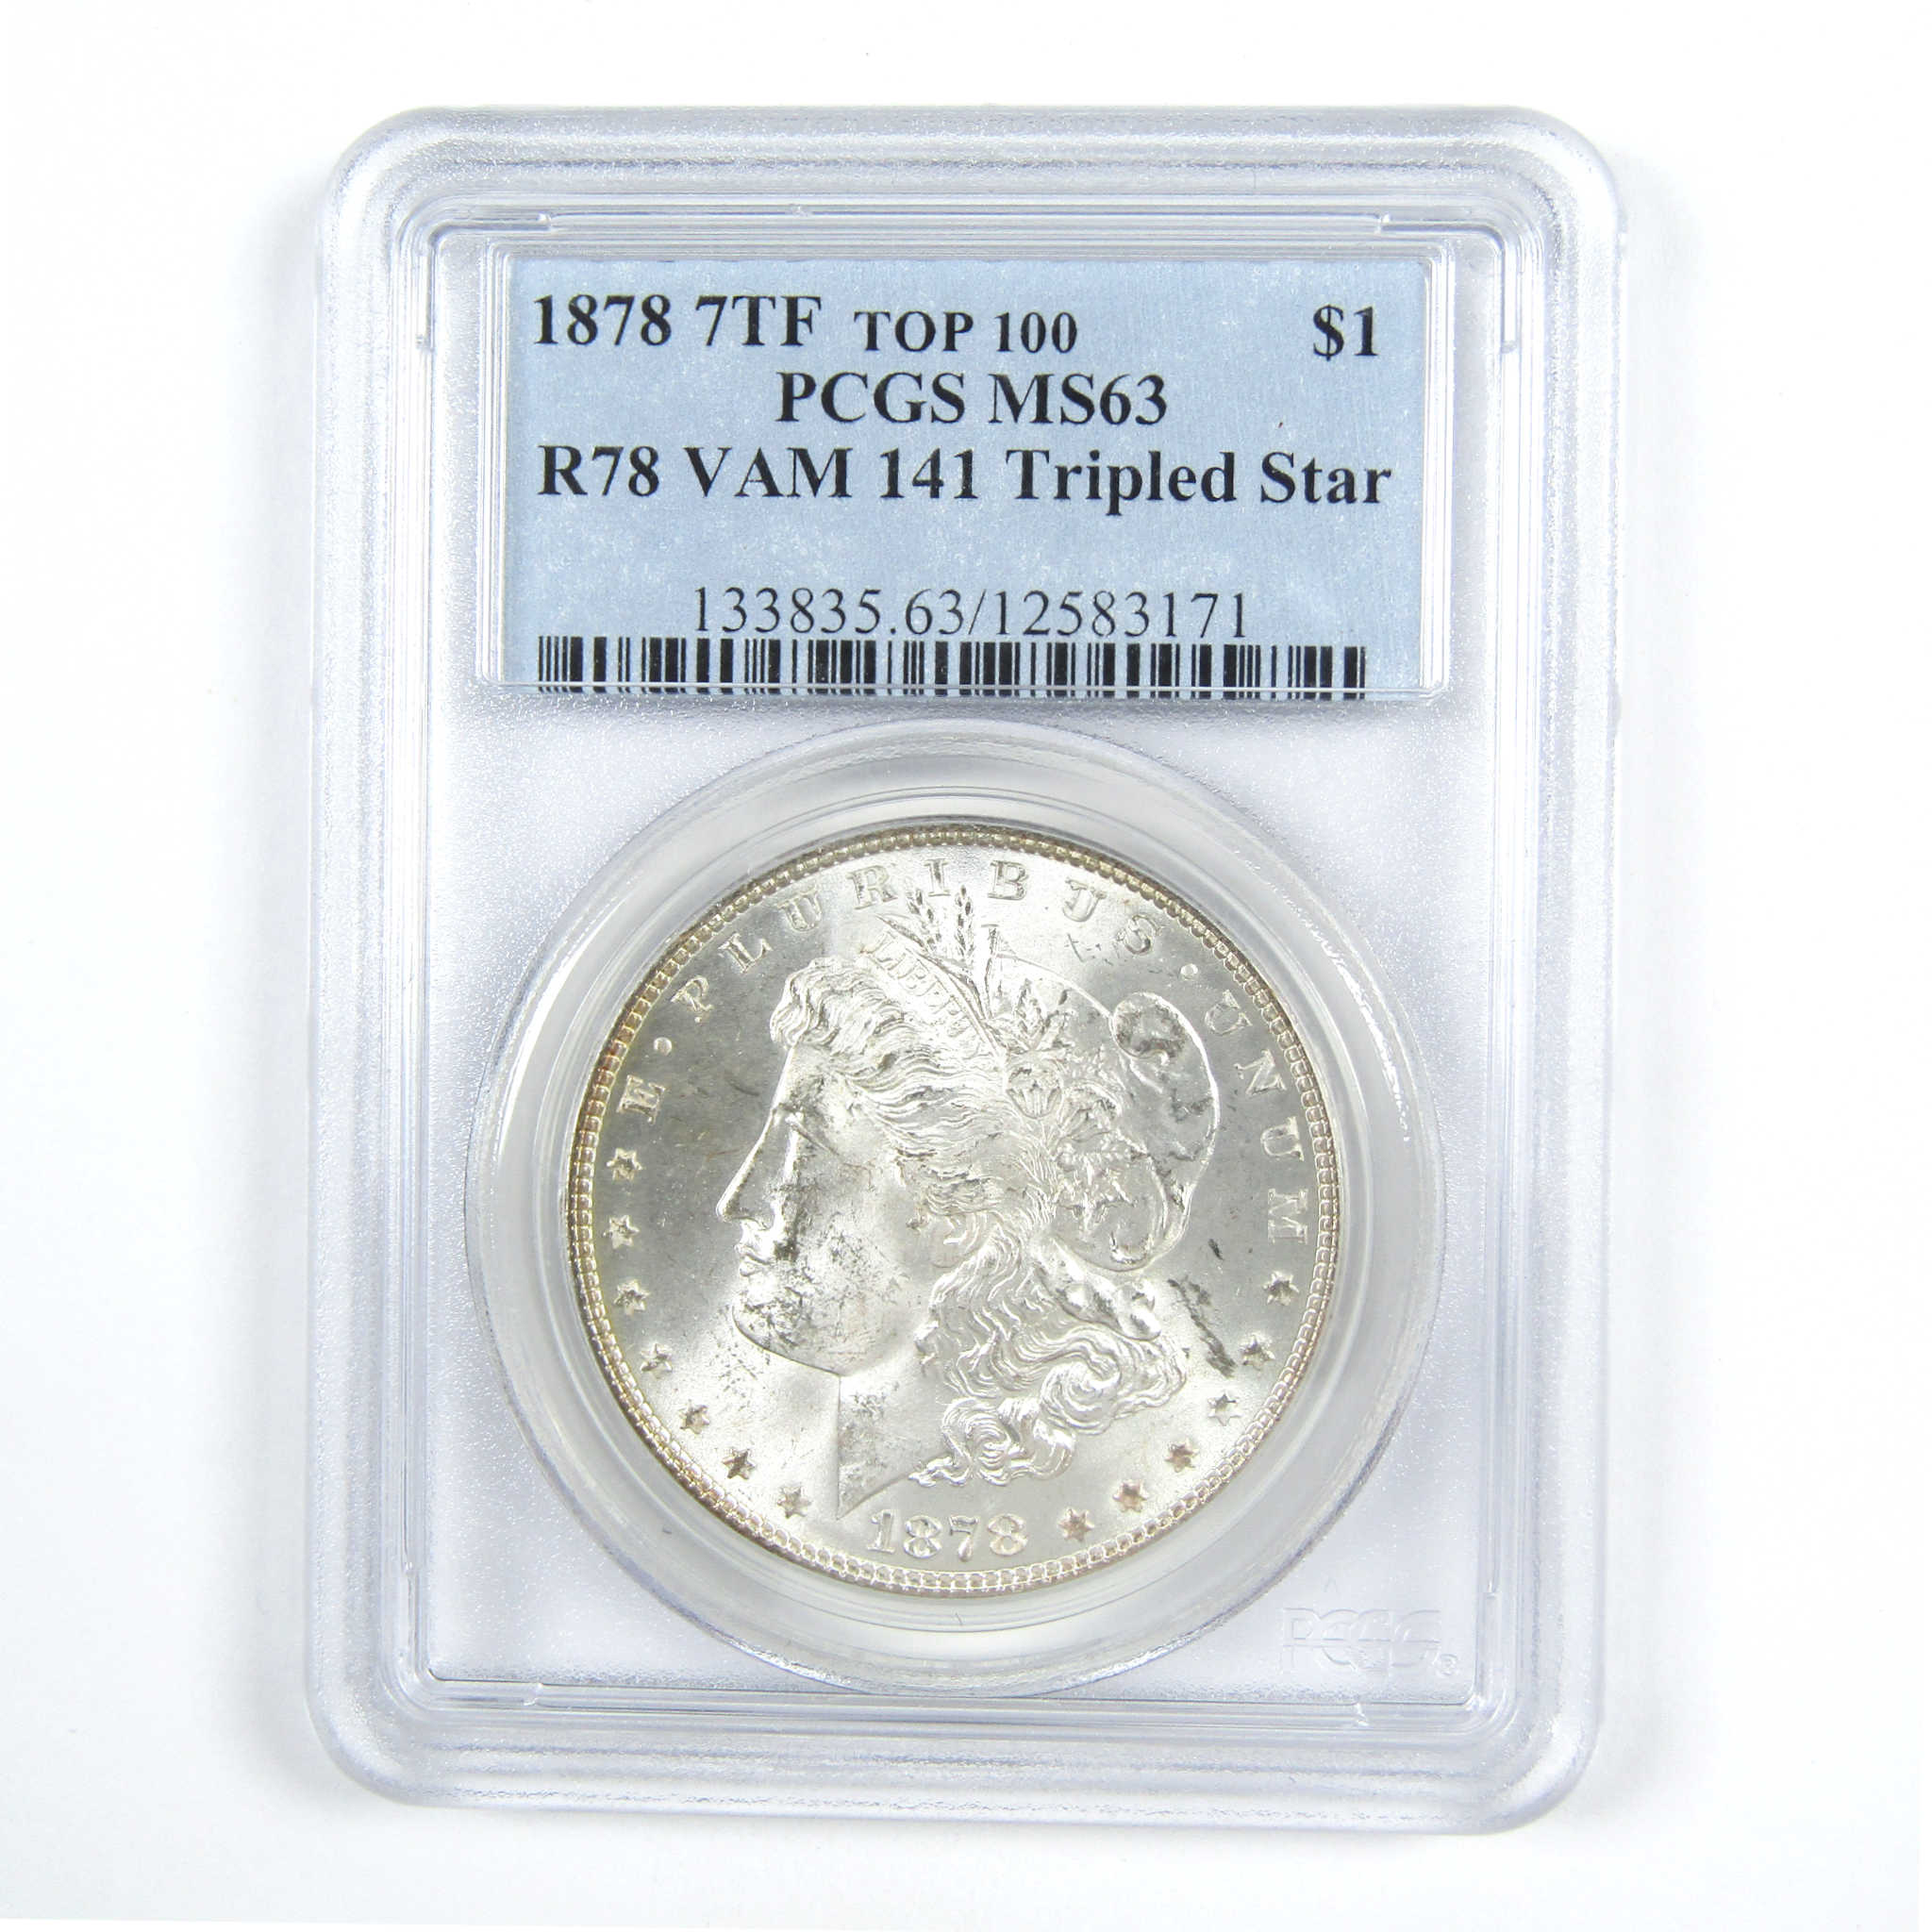 1878 7TF Rev 78 VAM-141 Tripled Star Morgan $1 MS 63 PCGS SKU:CPC7329 - Morgan coin - Morgan silver dollar - Morgan silver dollar for sale - Profile Coins &amp; Collectibles